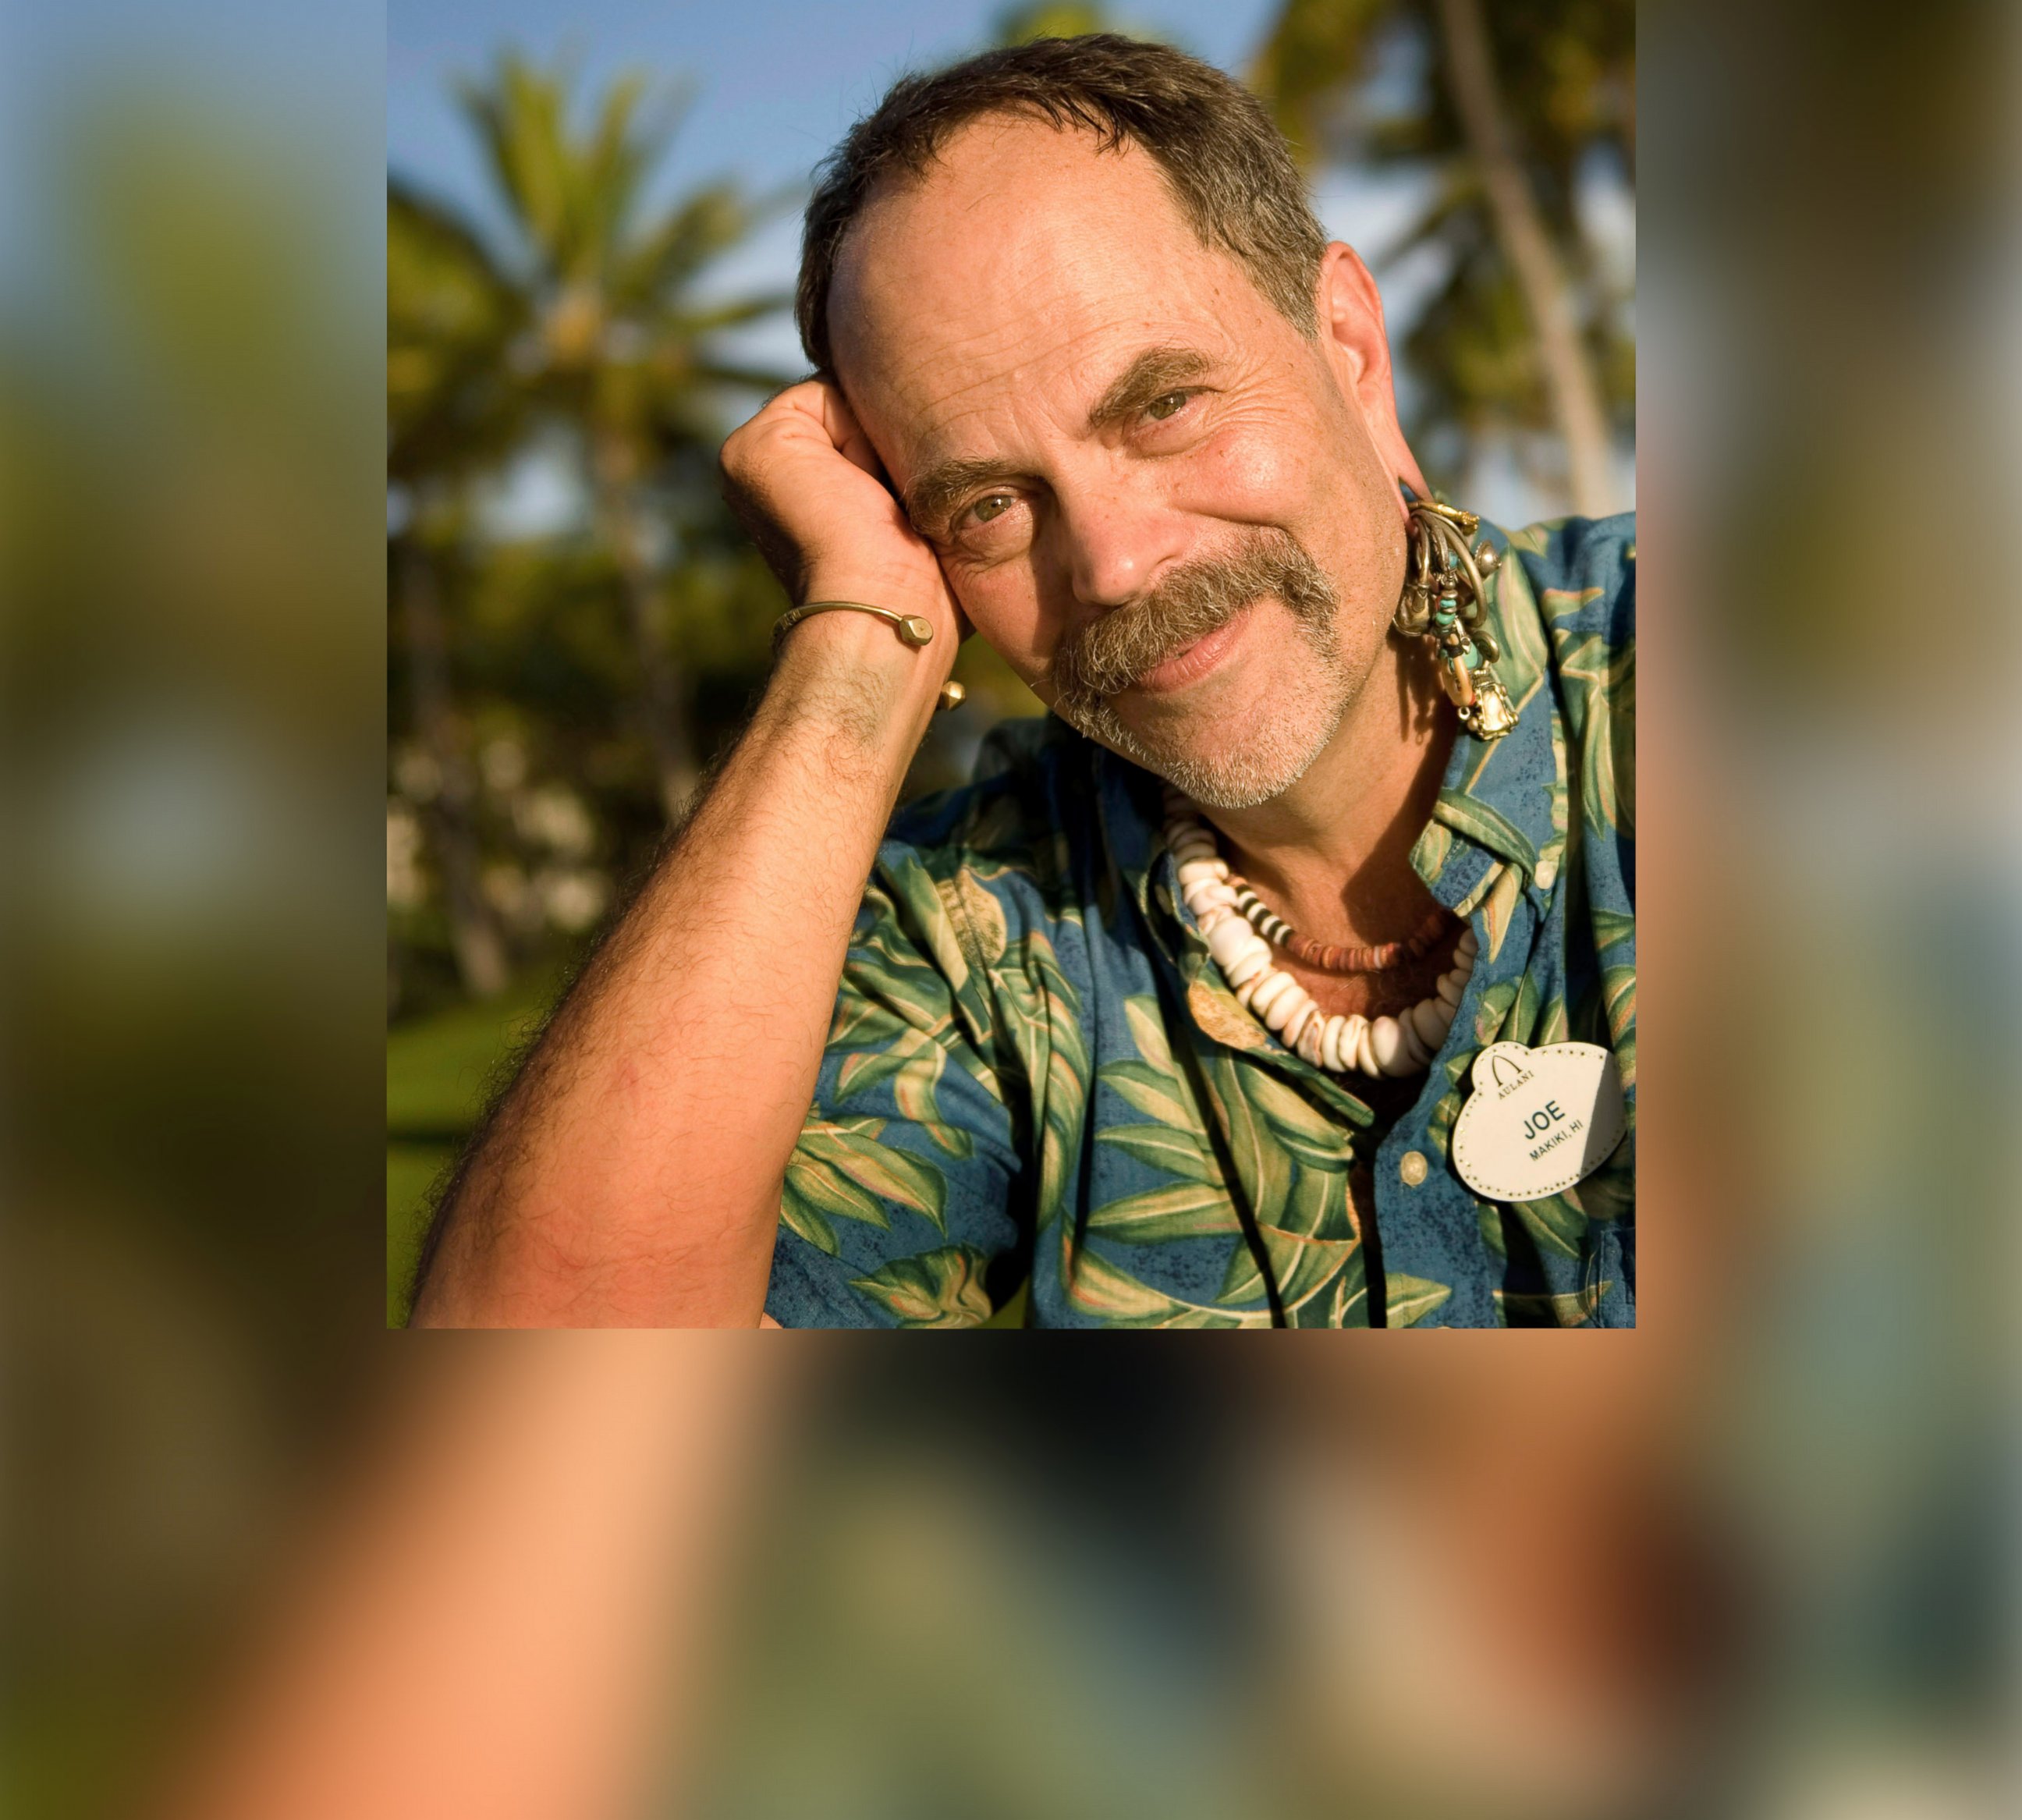 PHOTO: Joe Rohde, executive designer and vice president, Creative Walt Disney Imagineering, said he draws inspiration for new Disney attractions and hotels from his travels and books.